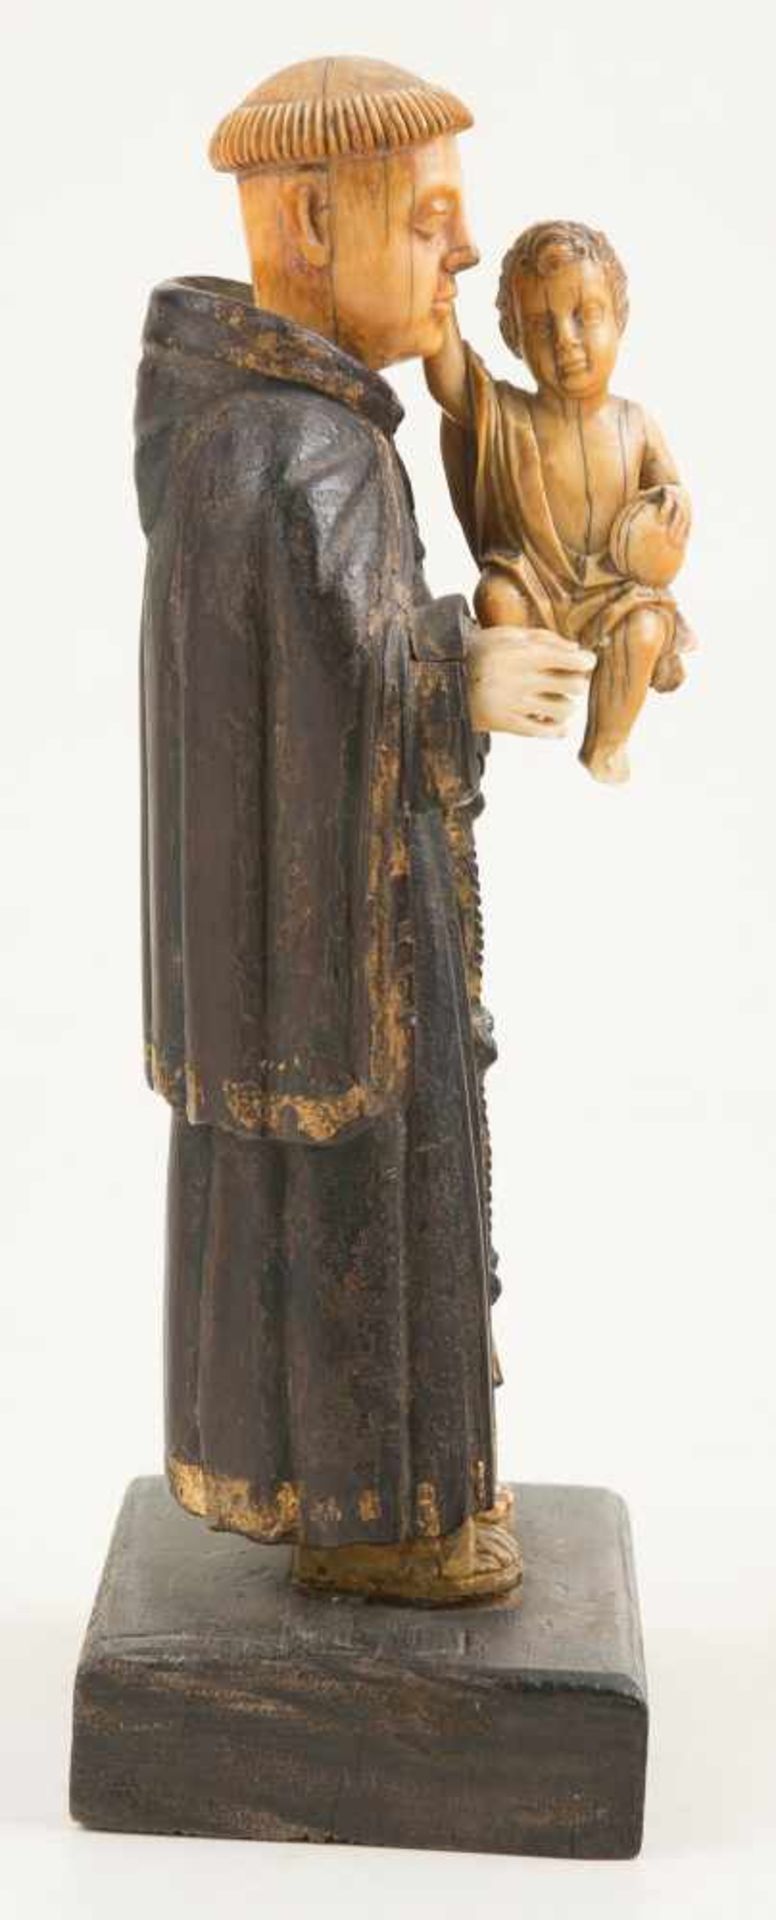 "Saint Anthony with the Christ Child" Sculpted ivory figure. Indo-Portuguese. 17th-18th century. - Bild 2 aus 3